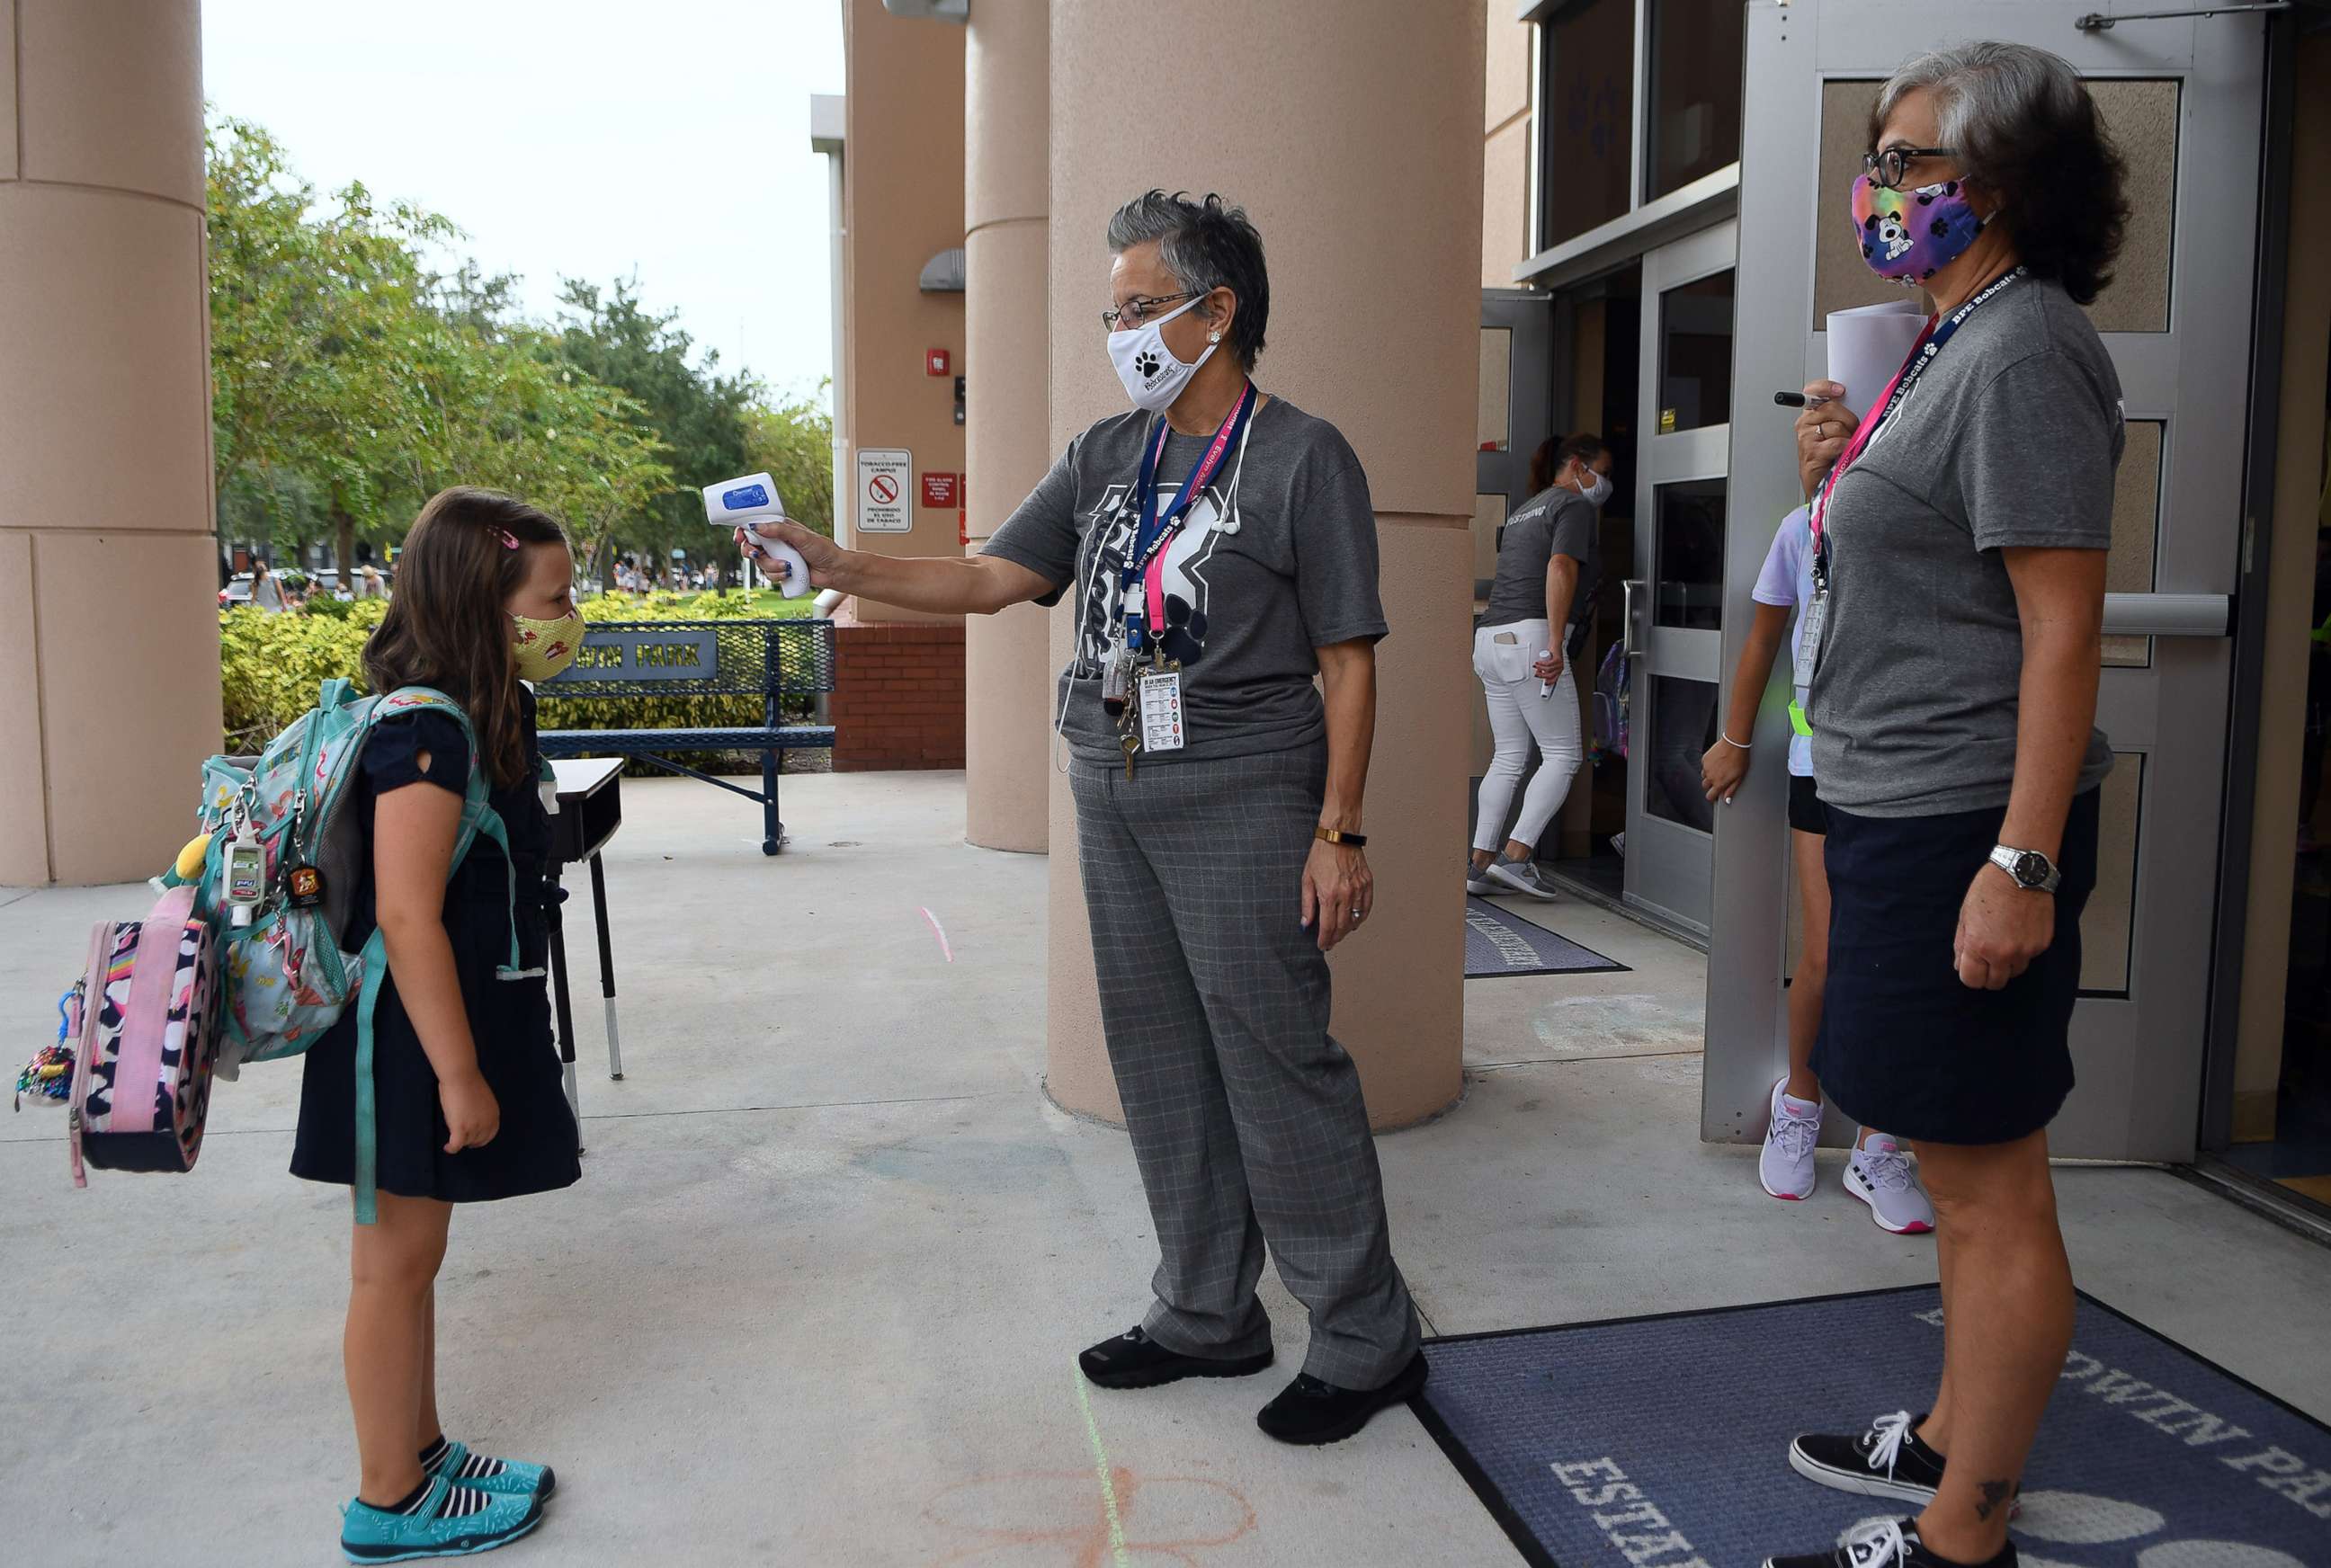 PHOTO: In this Aug. 21, 2020, file photo, a school employee checks the temperature of a student as she returns to school on the first day of in-person classes in Orange County at Baldwin Park Elementary School, in Orlando, Fla.